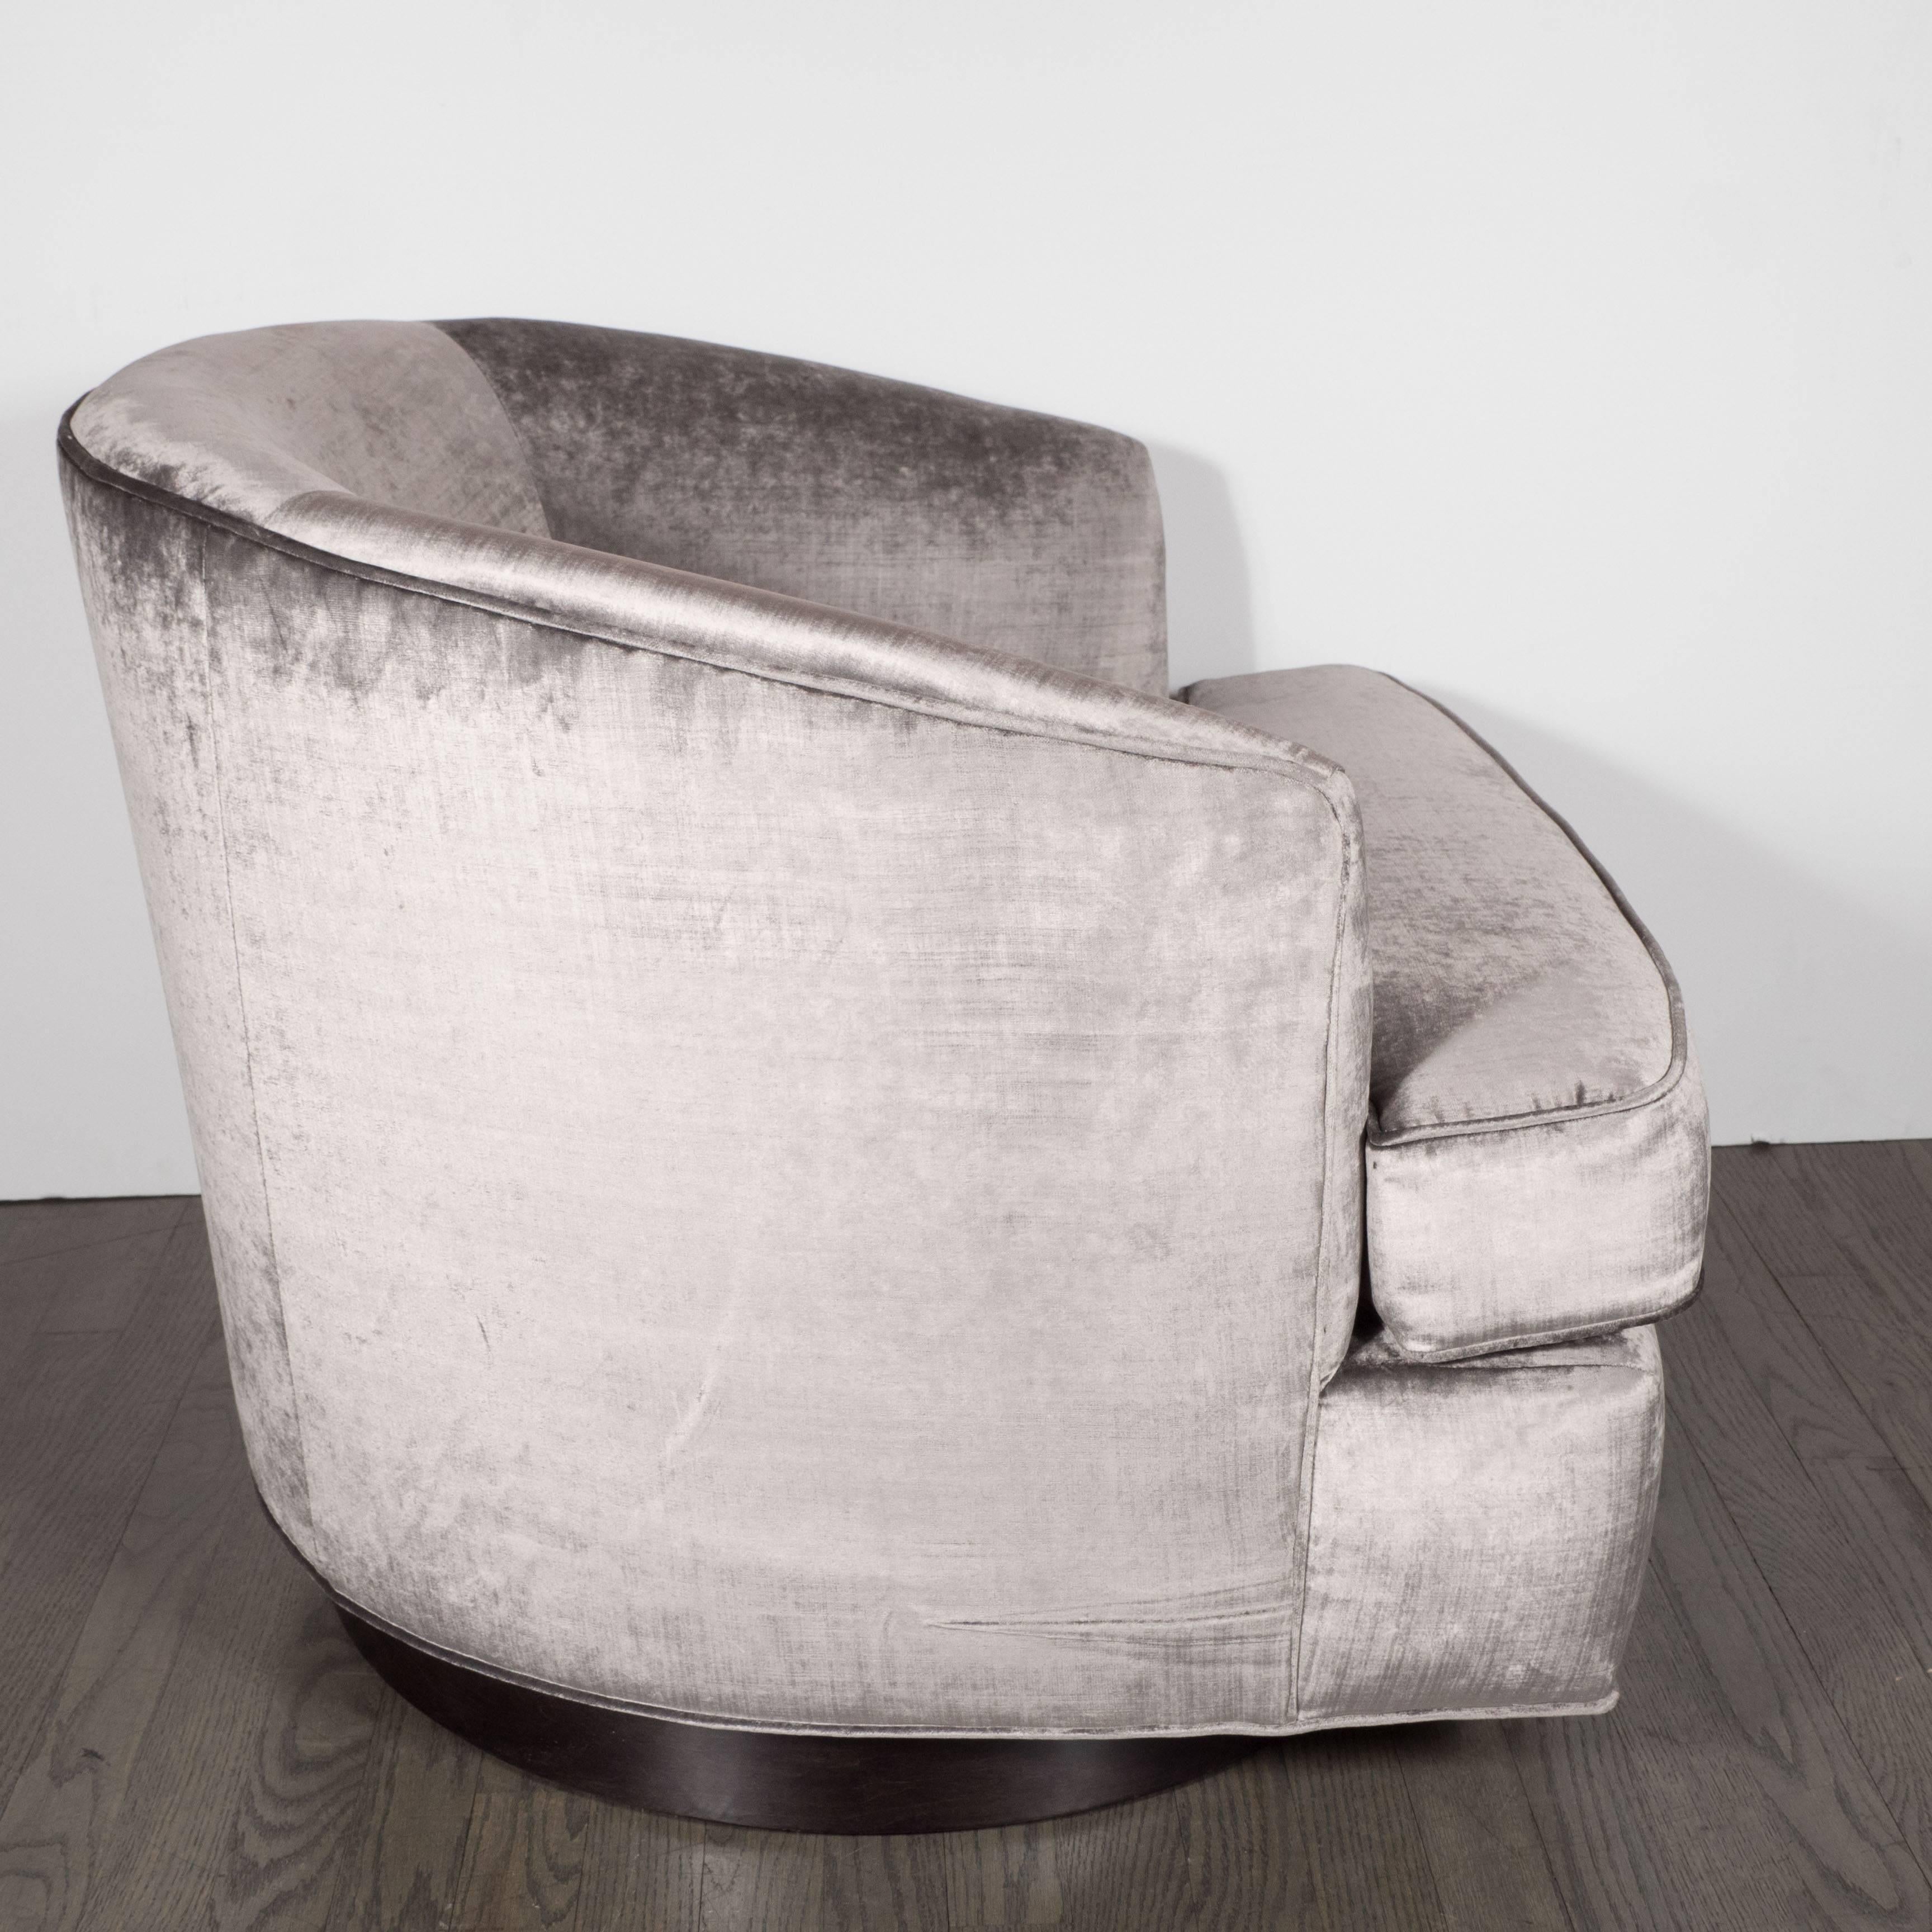 Mid-Century Modernist Milo Baughman swivel chair in platinum grey velvet with ebonized walnut base, American, circa 1970. This chair features a removable, fully upholstered cushion. Narrow arms and minimal detailing lend to a clean, modernist